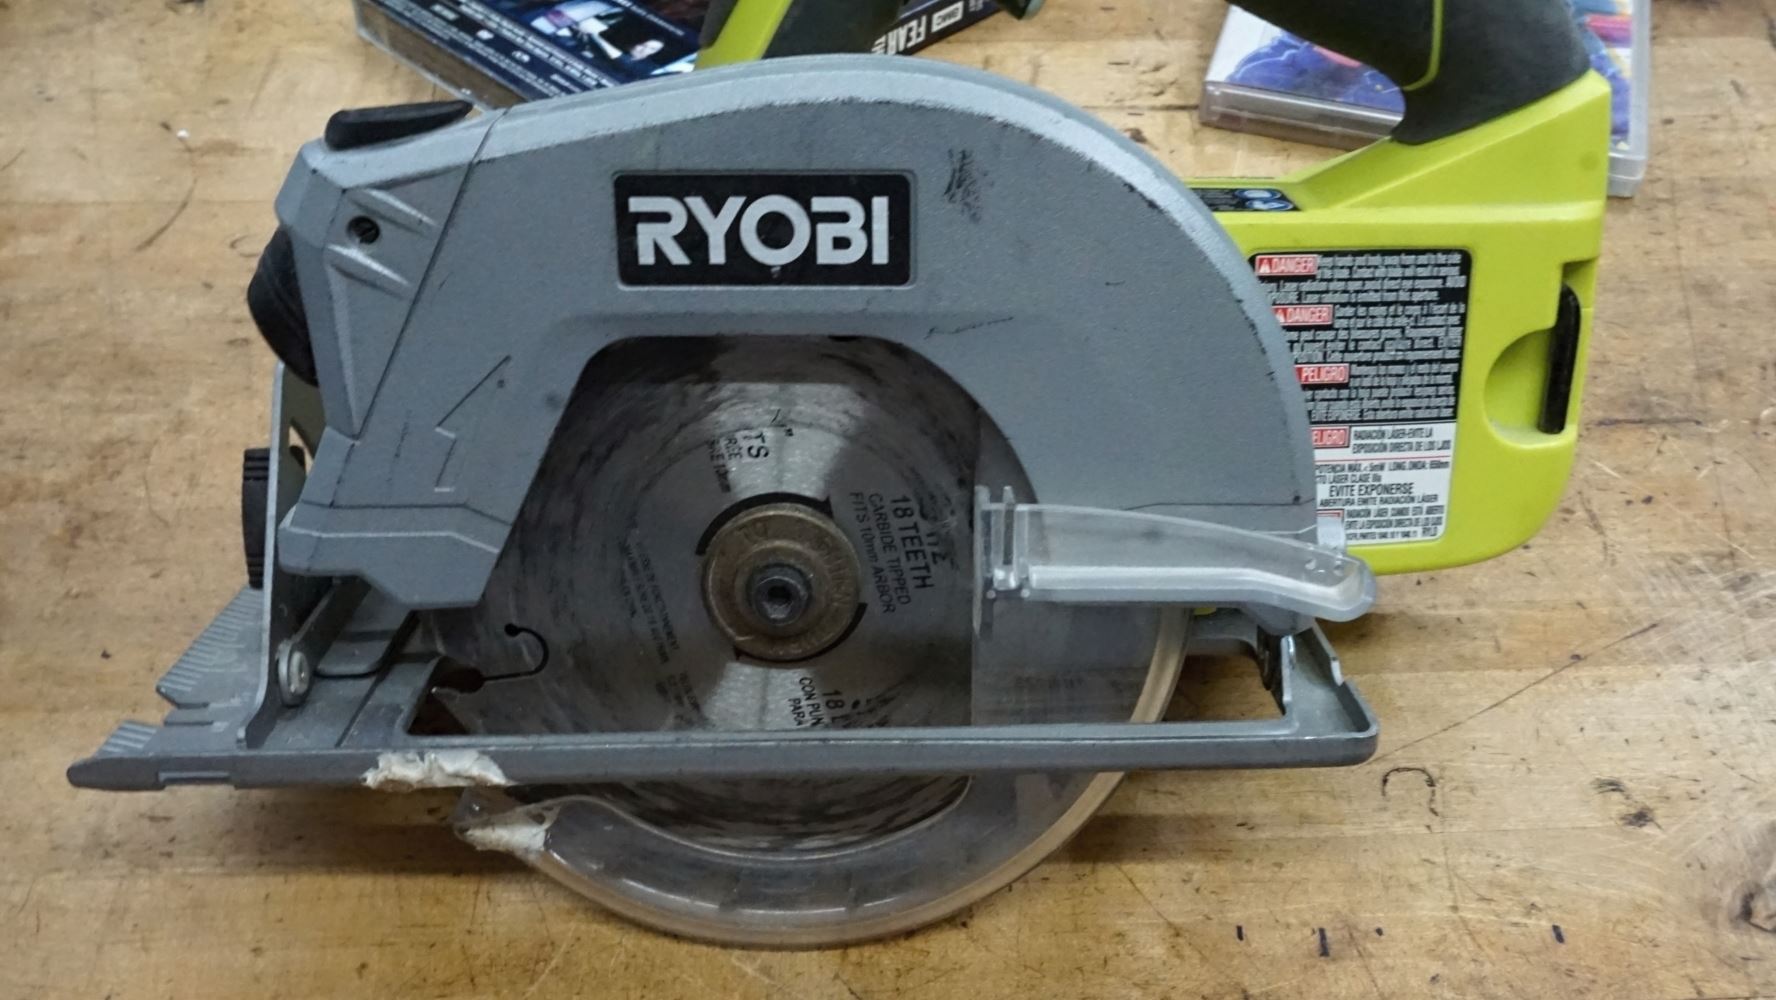 Cash USA Ryobi 5 1/2" Cordless Circular Saw Model# P506 TOOL ONLY USED. TESTED. IN A GOOD WORKING ORDER.